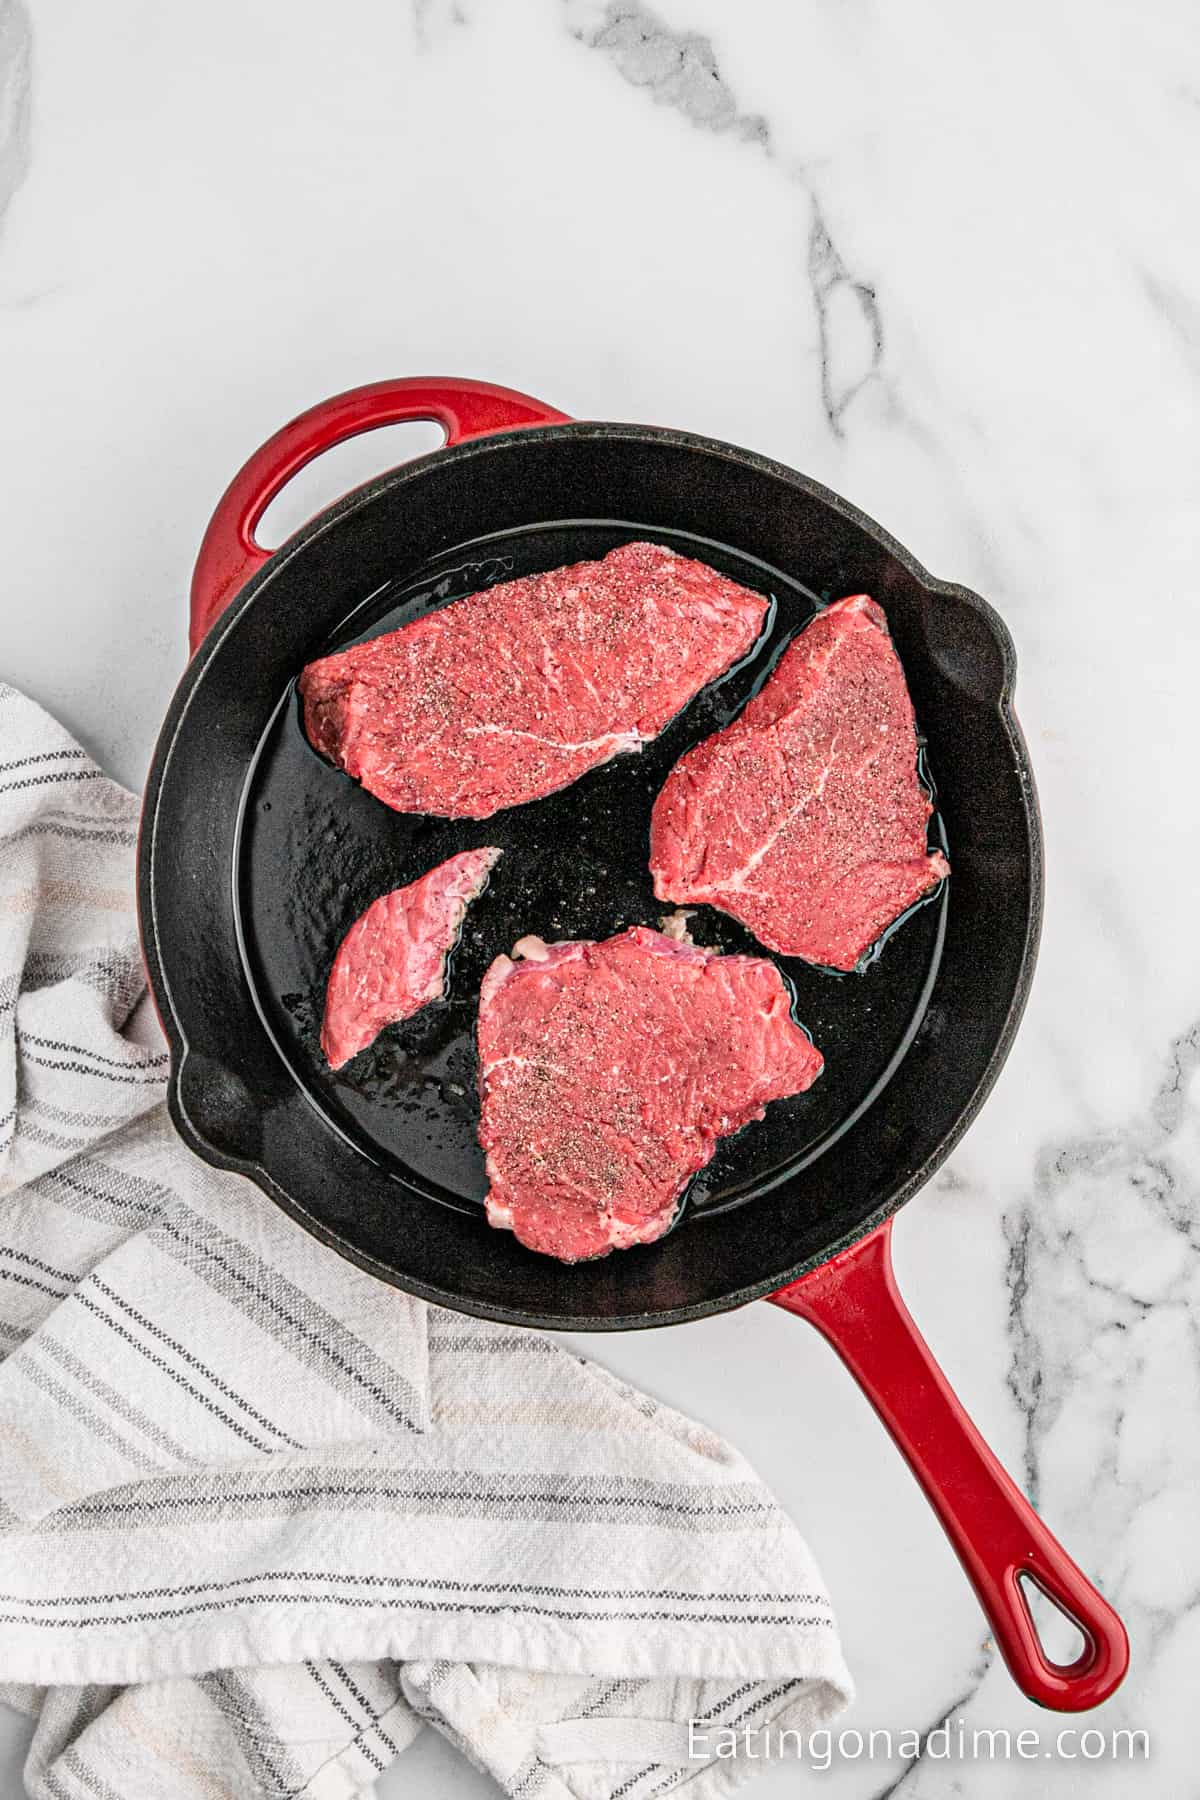 Cooking steak in a cast iron skillet